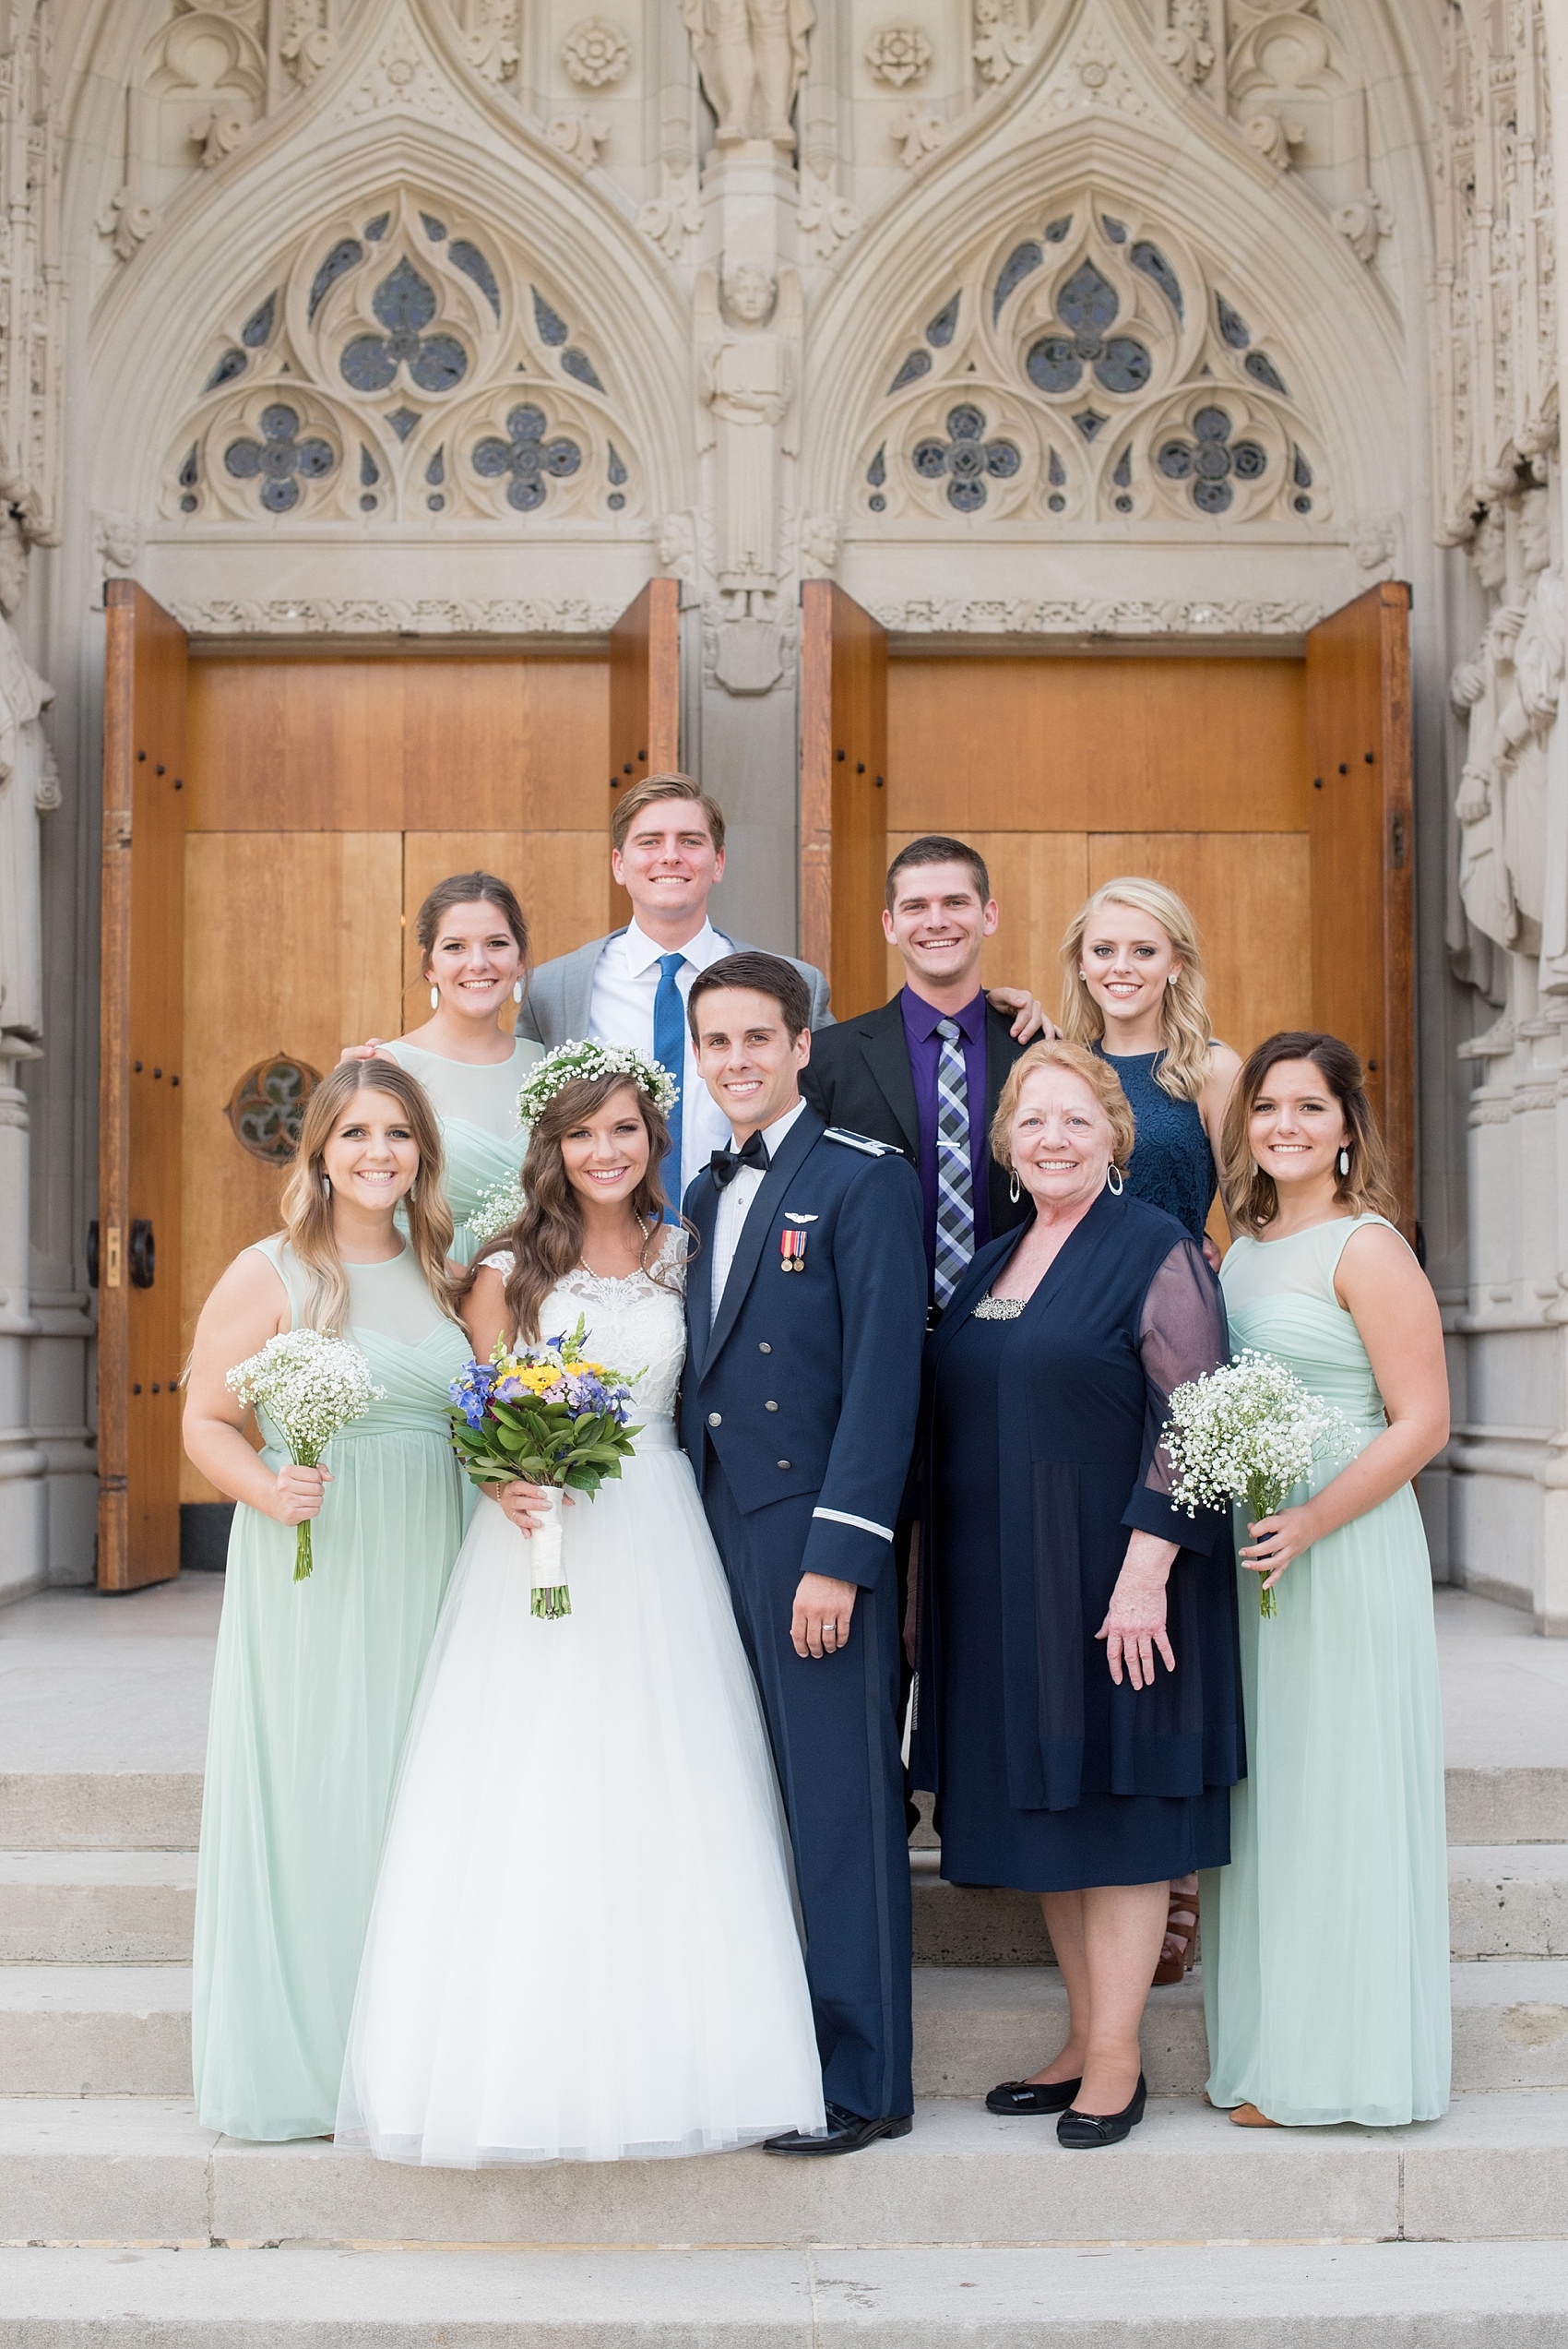 Mikkel Paige Photography photo of a Duke Chapel wedding in Durham, North Carolina. The bride and her cousins and grandmother in front of the iconic gothic church.